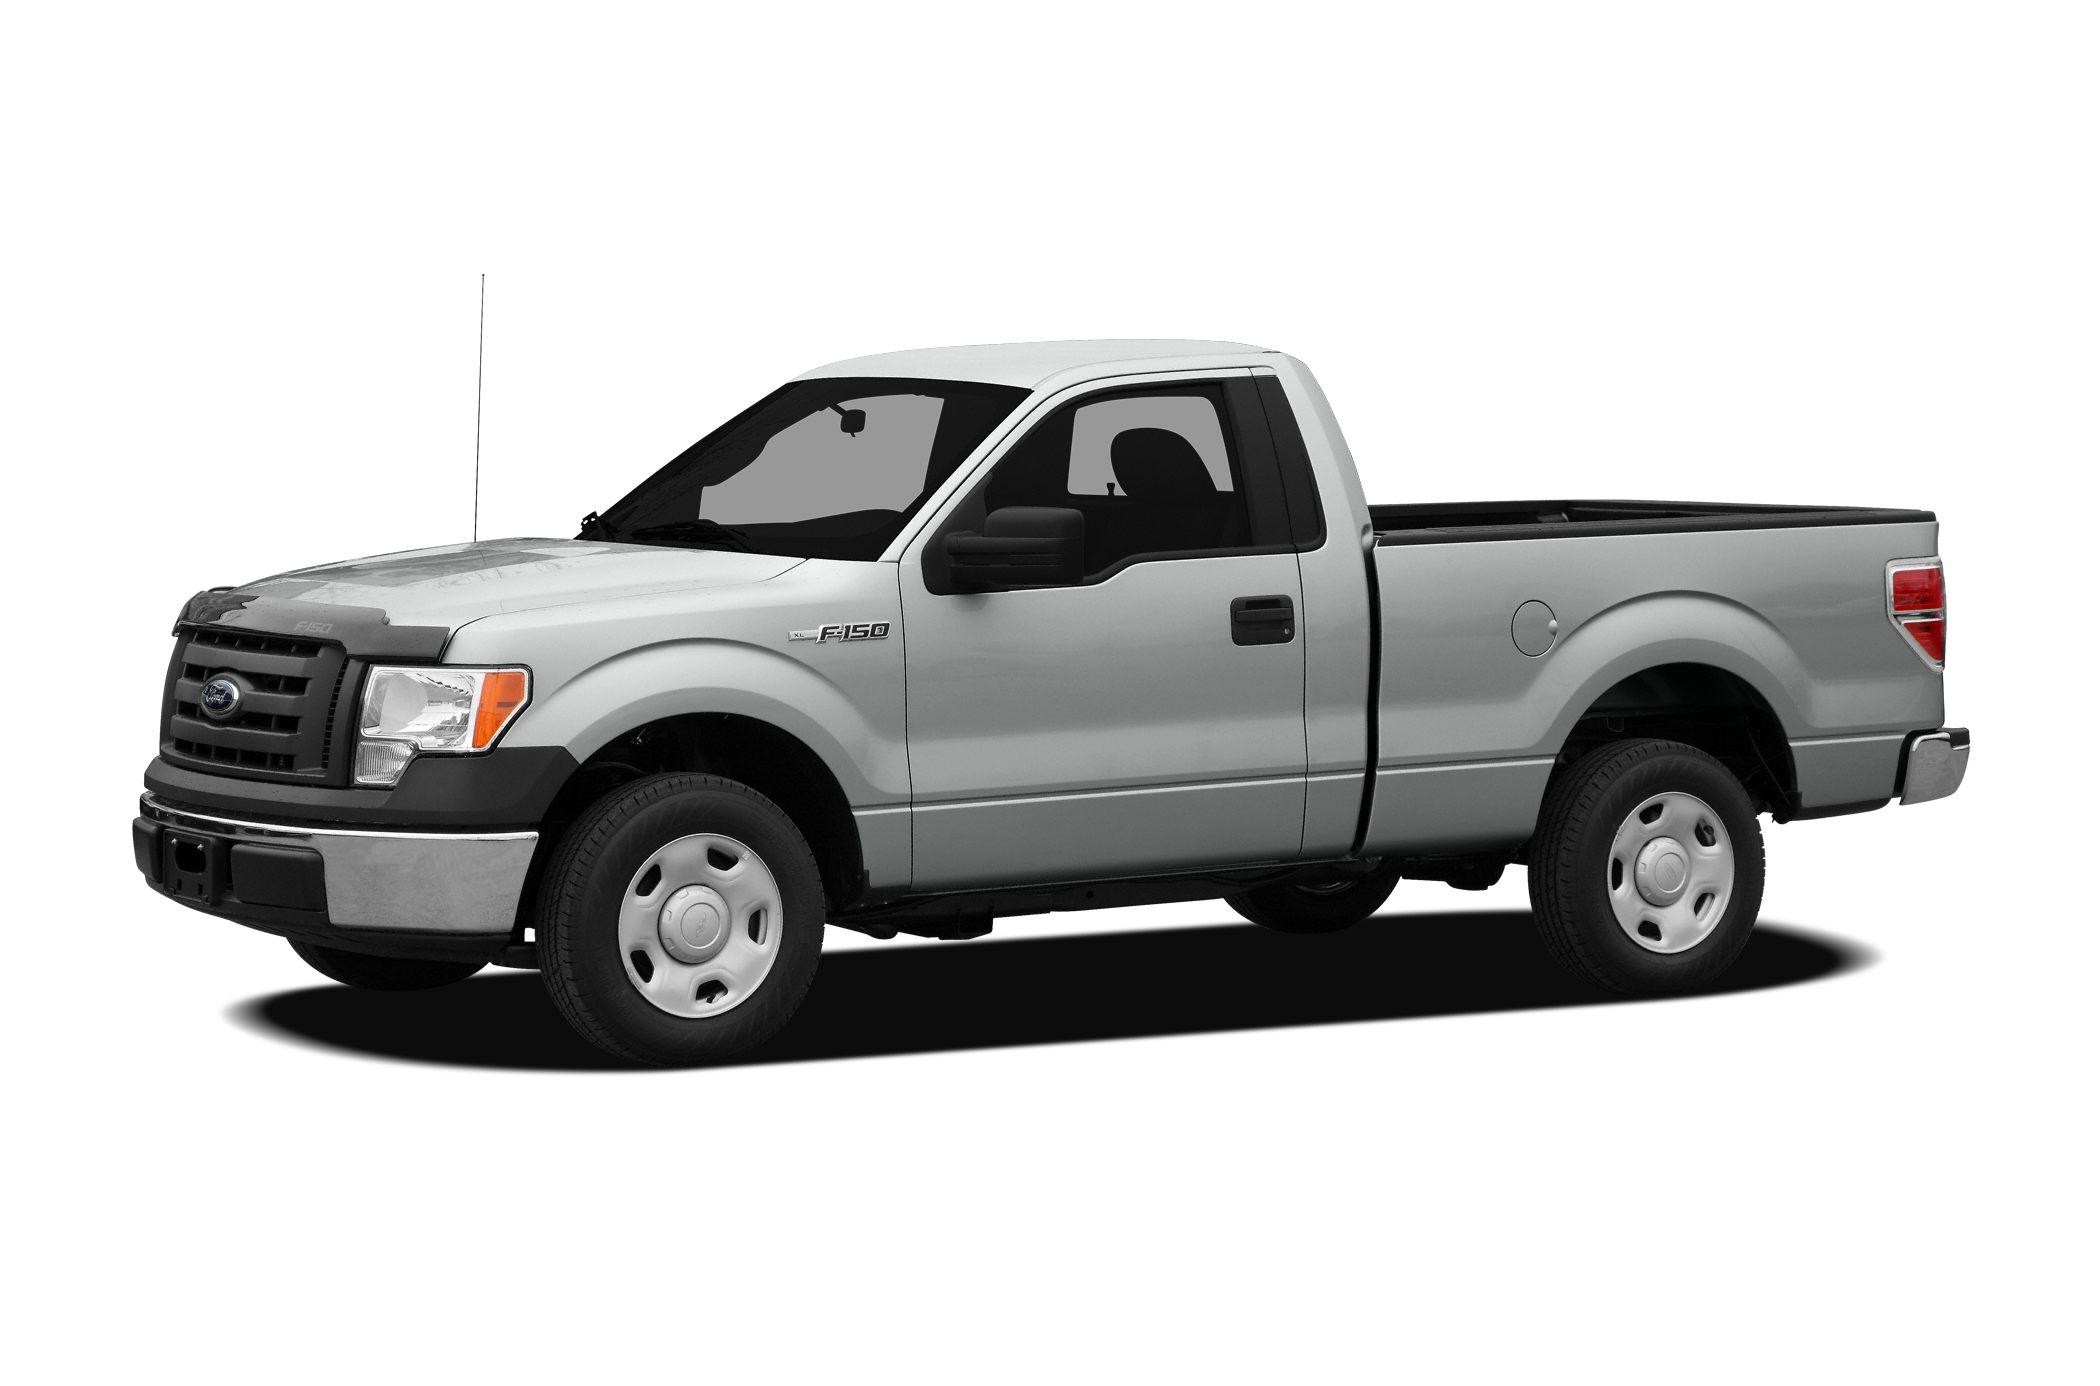 4 6 Liter ford Engine Diagram 2009 ford F 150 Specs and Prices Models ford F150 4 6 Engine for Sale Of 4 6 Liter ford Engine Diagram